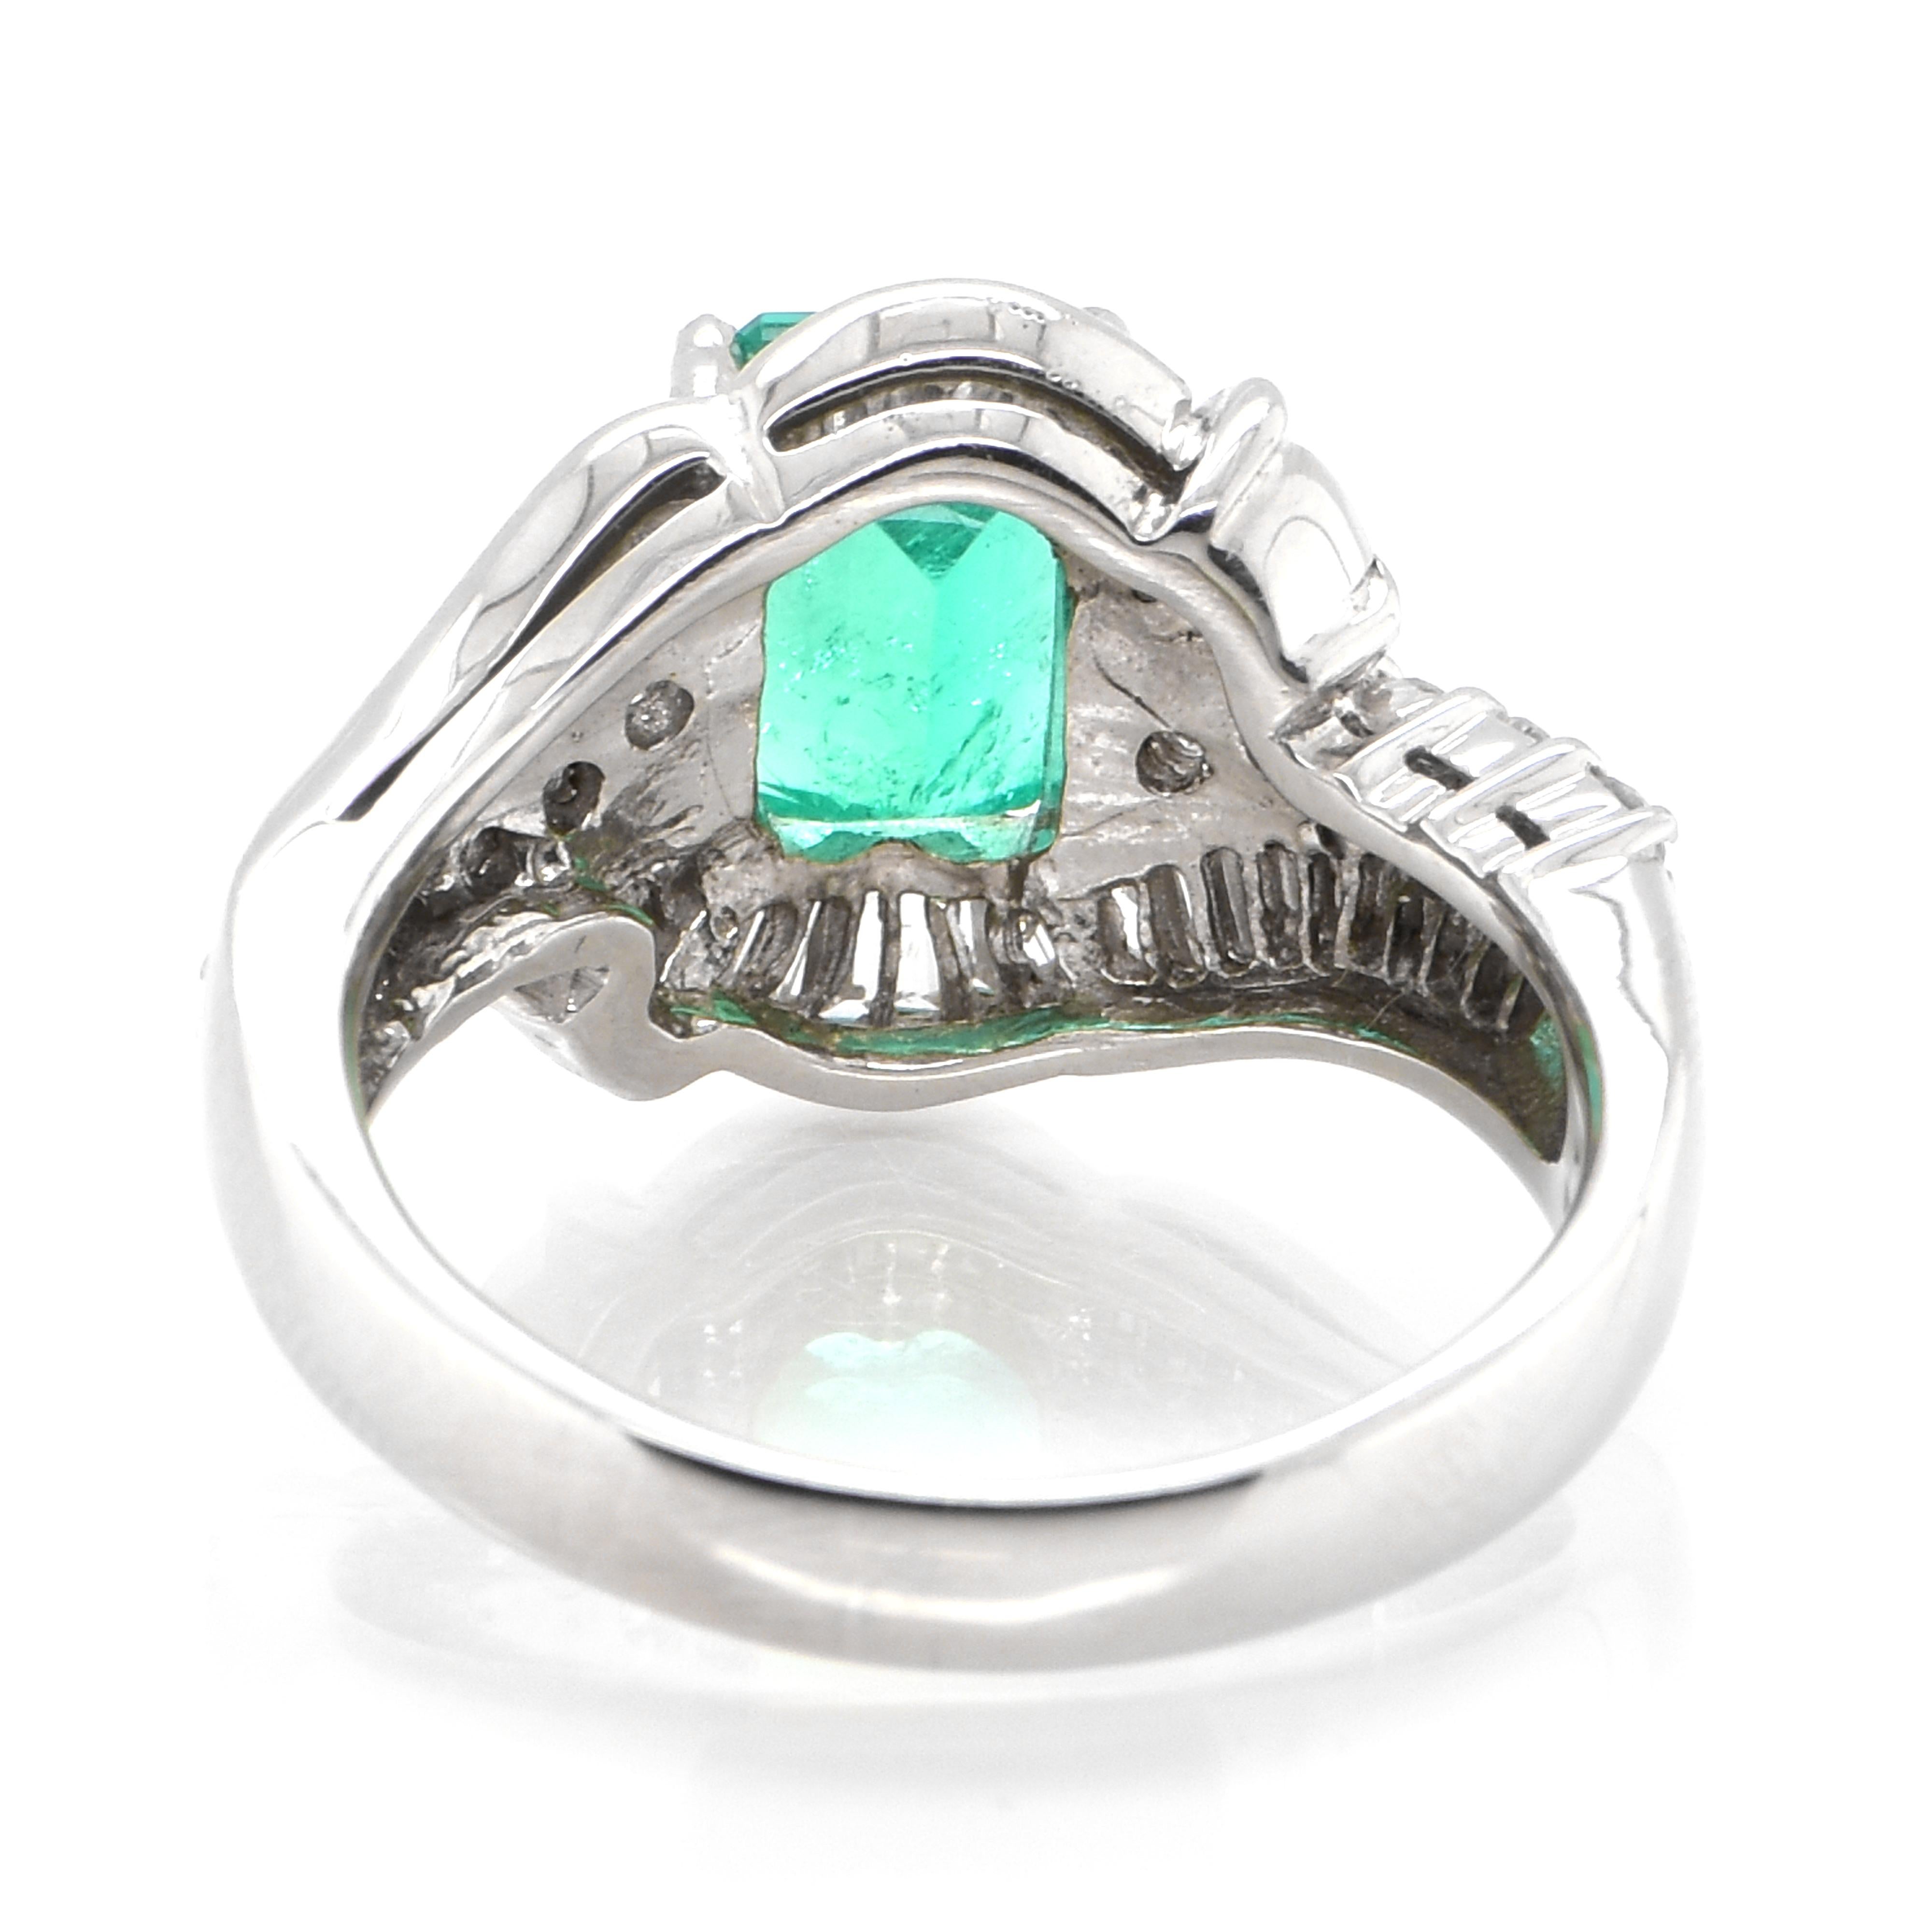 Women's 1.83 Carat Natural Emerald & Diamond Estate Cocktail Ring Made in Platinum For Sale